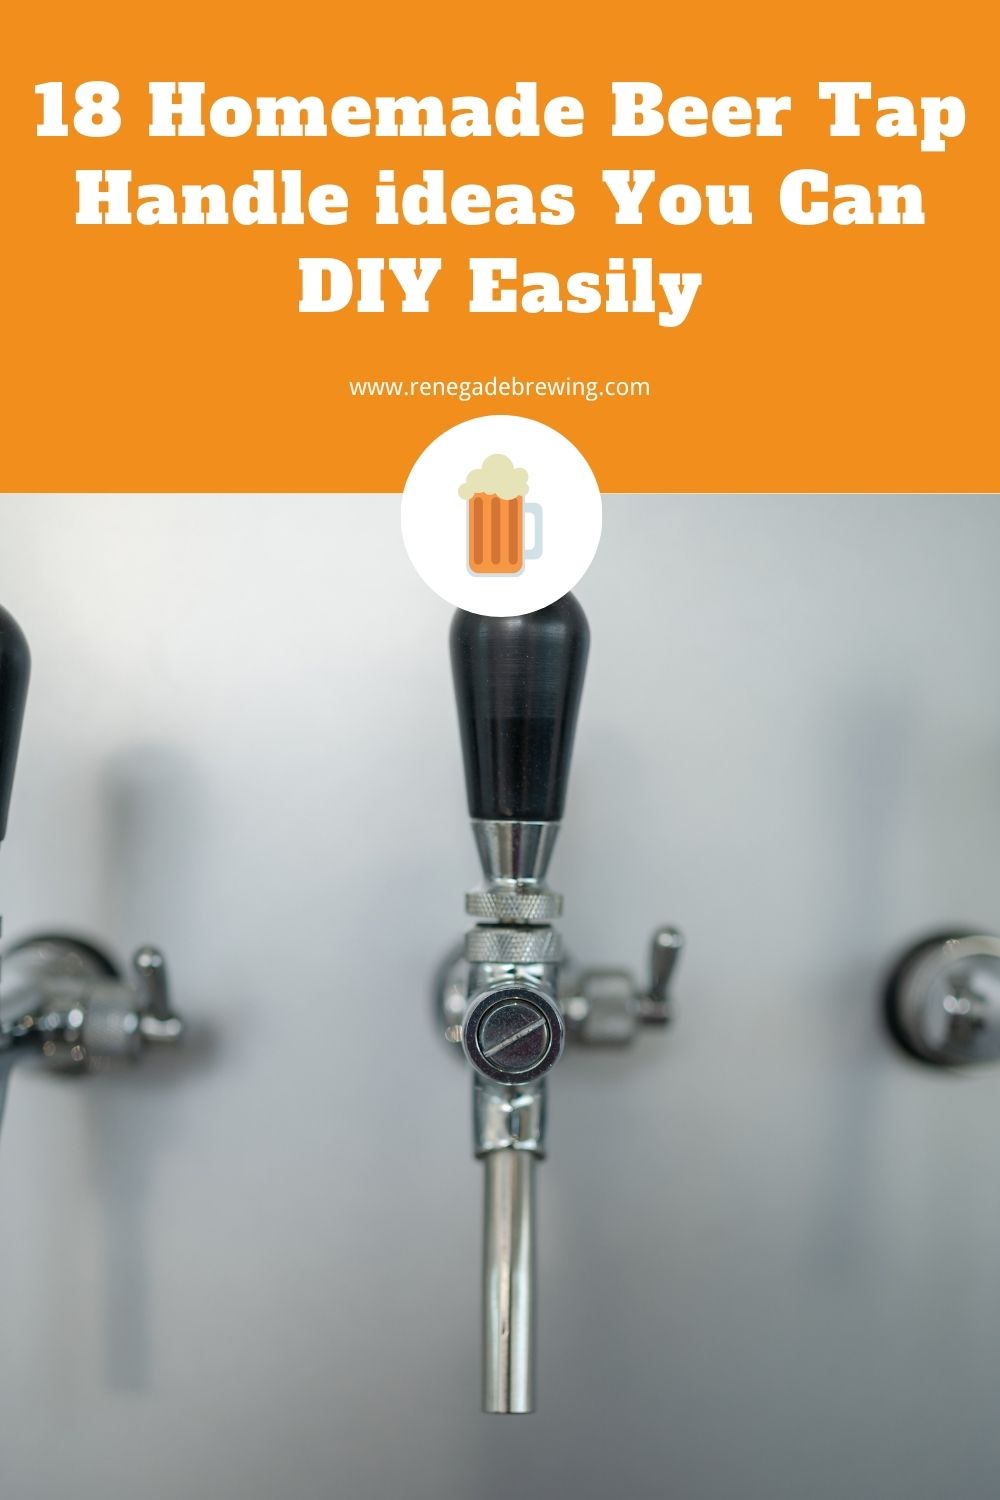 18 Homemade Beer Tap Handle ideas You Can DIY Easily 2